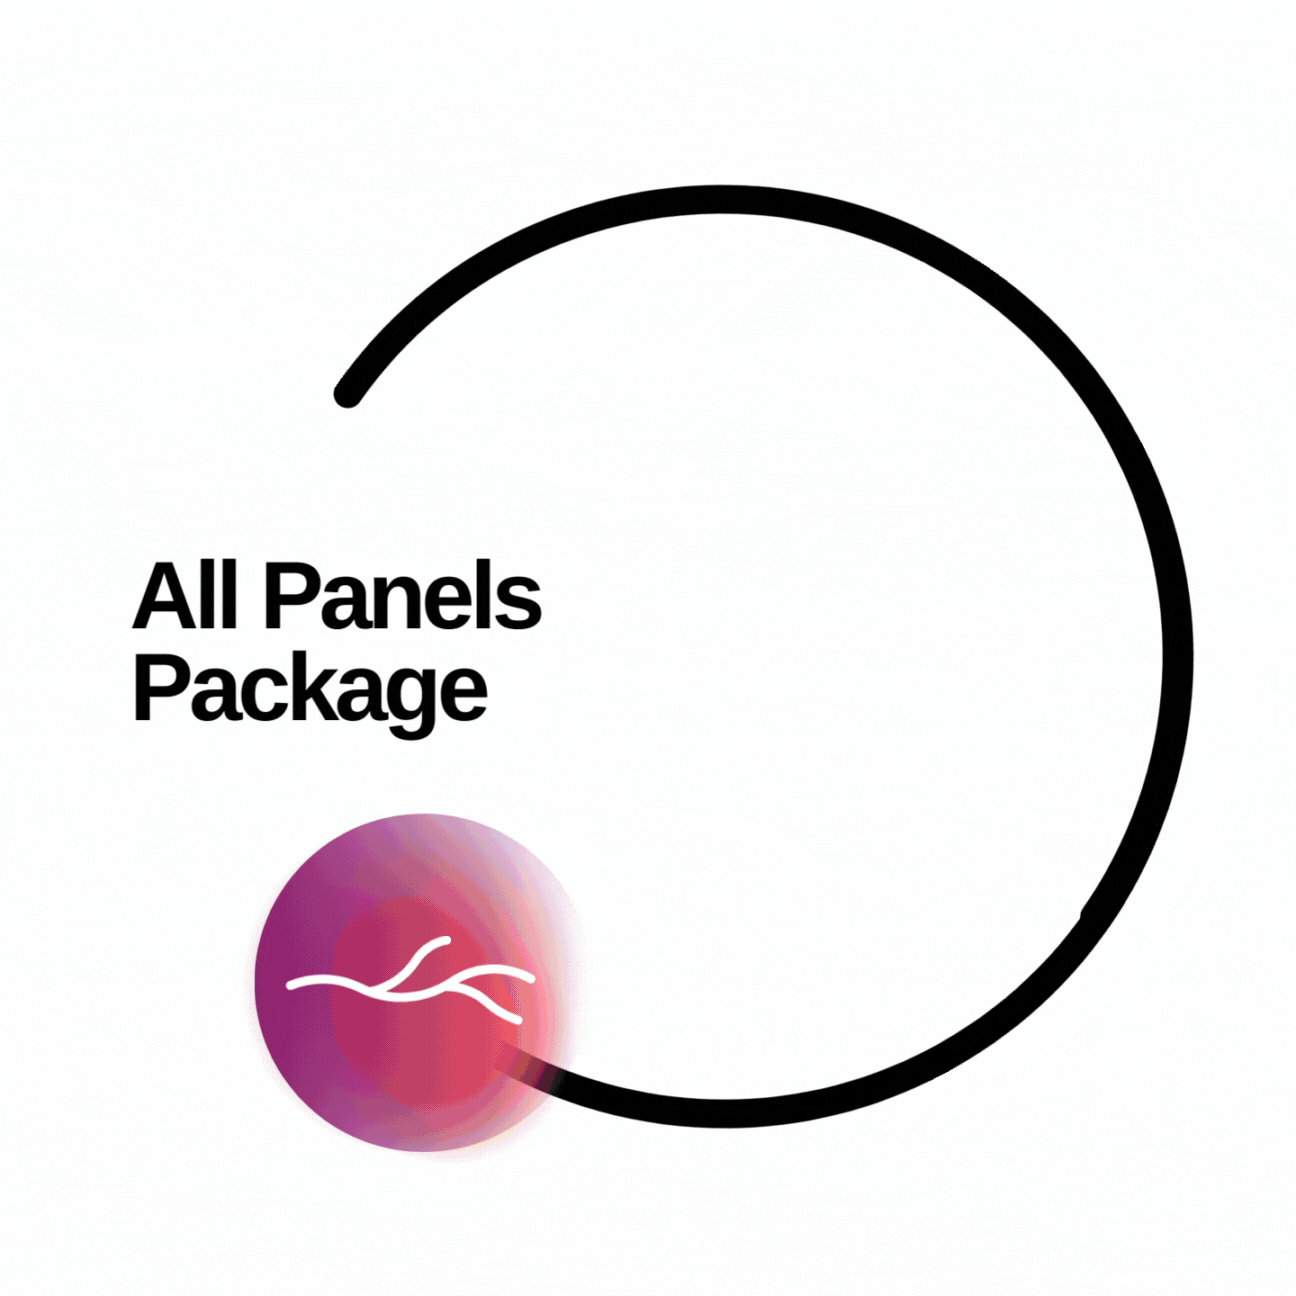 All Panels Package